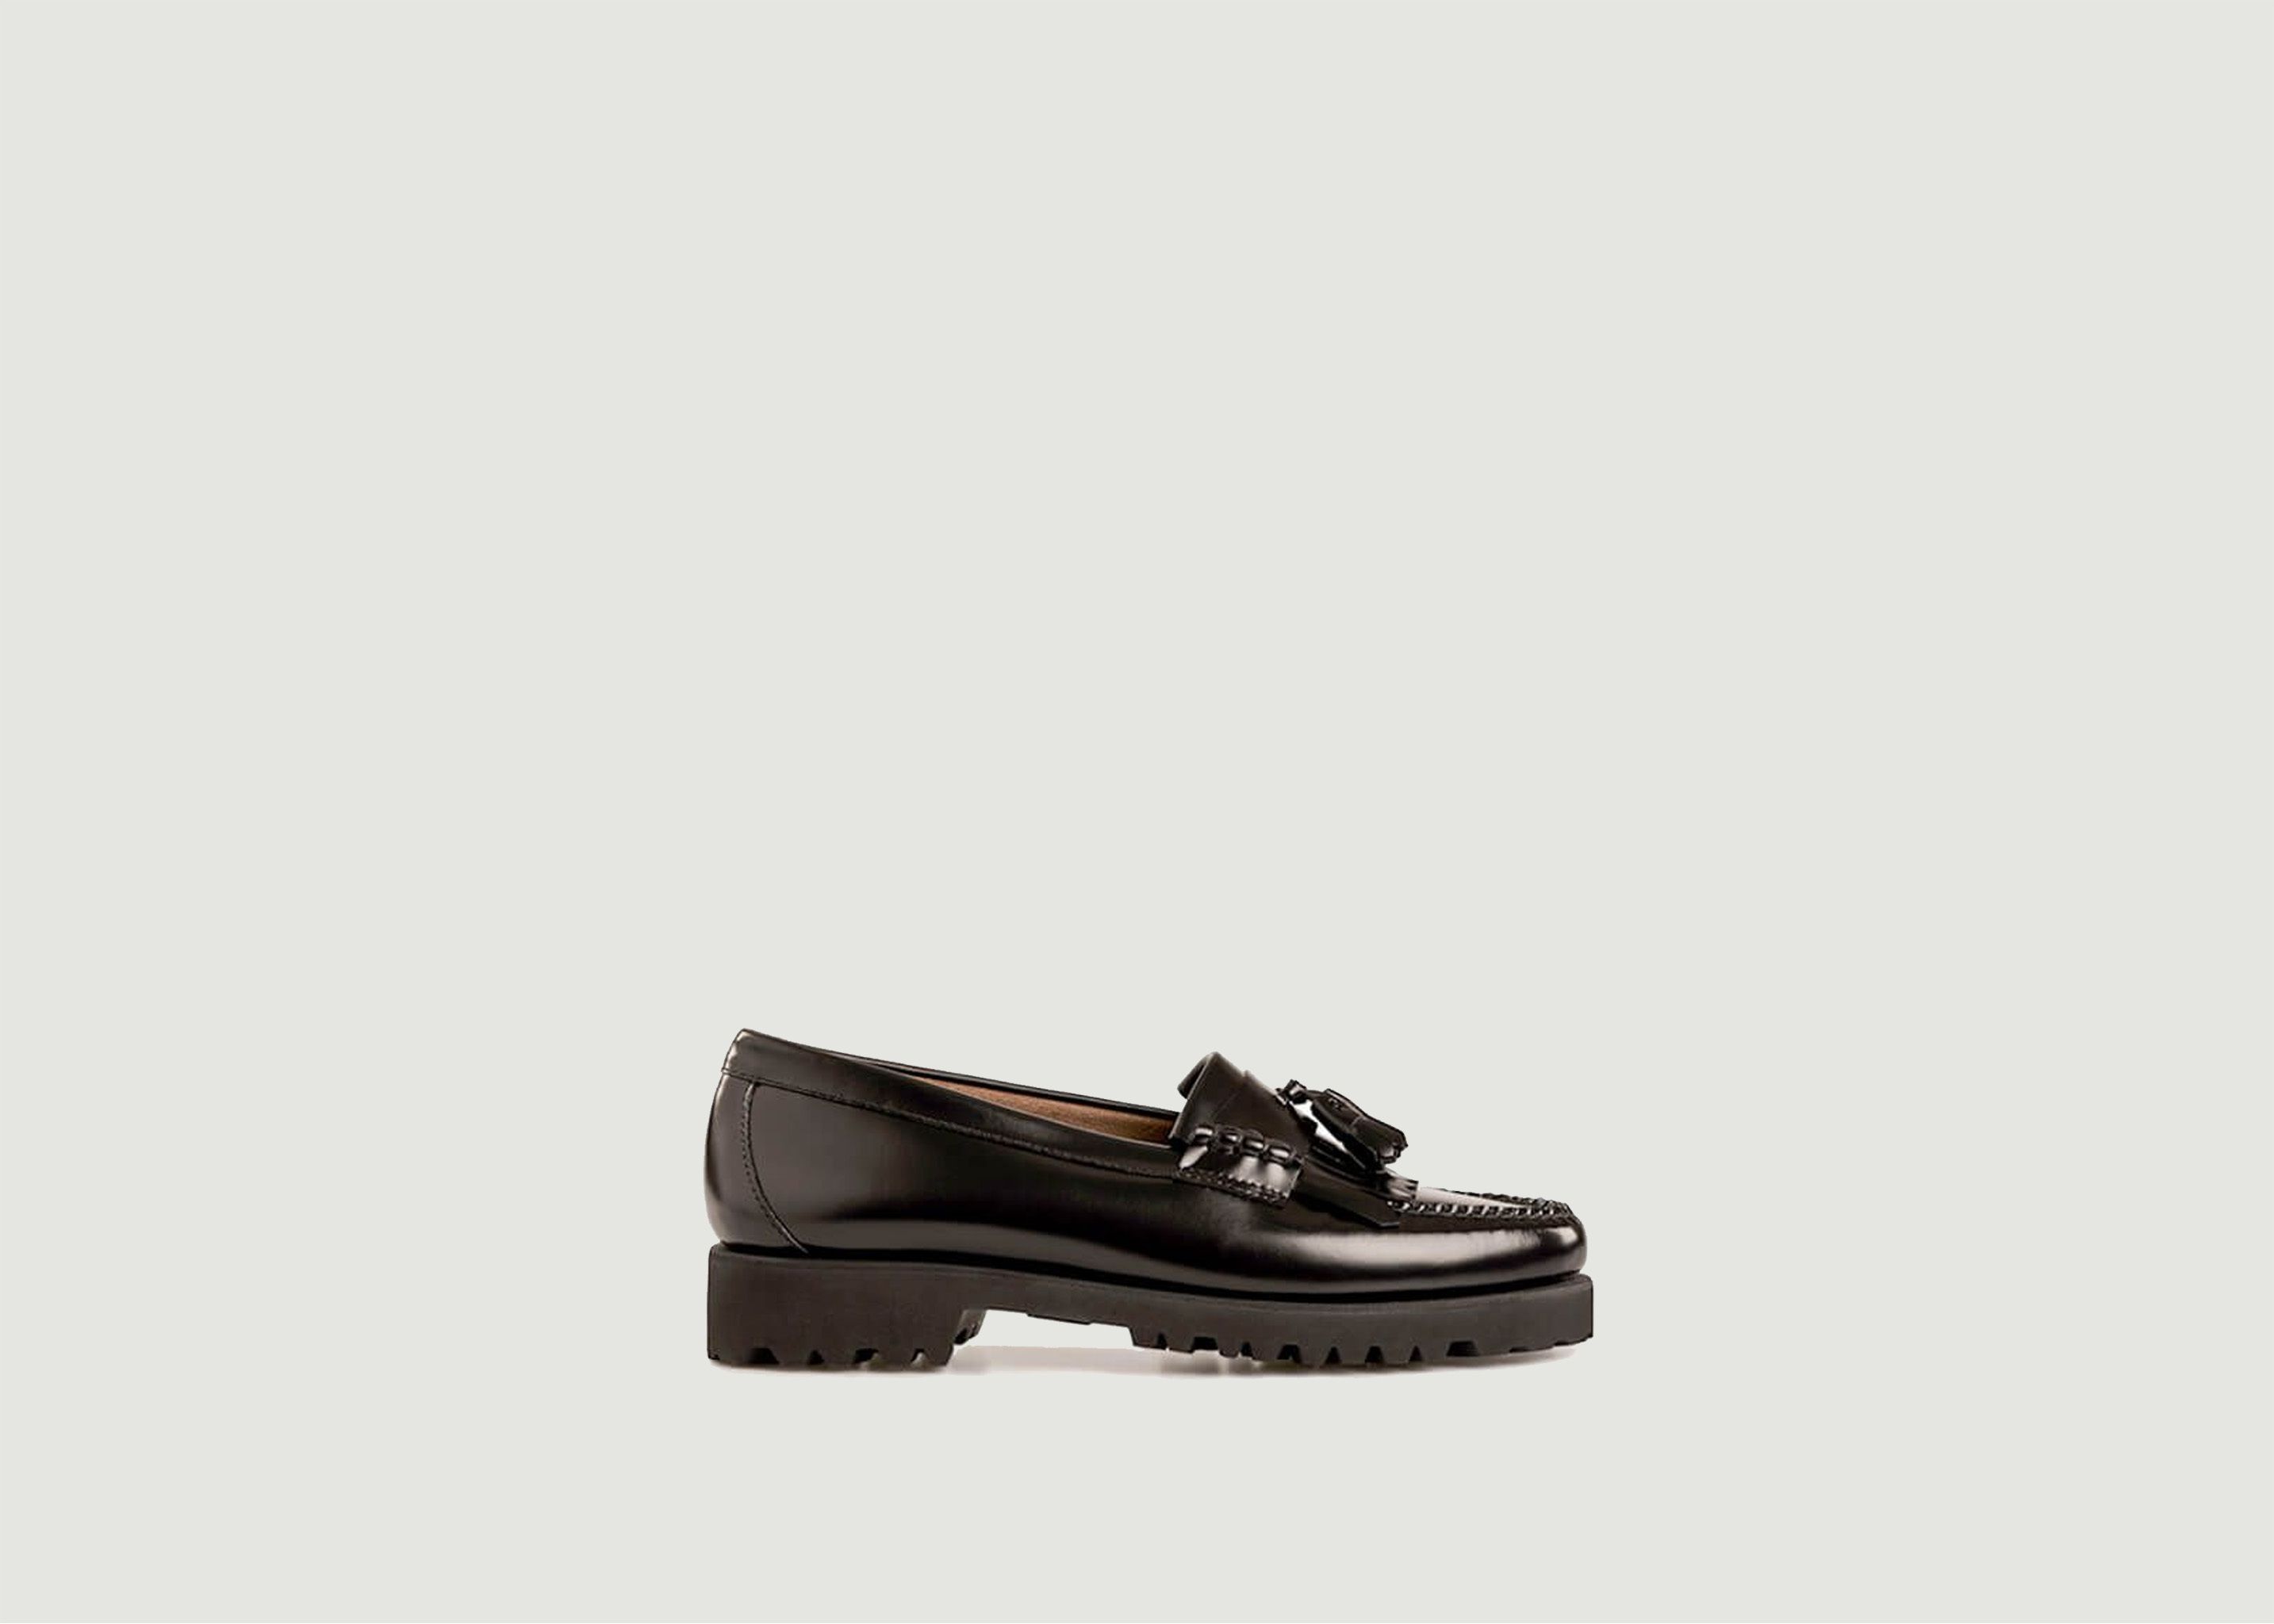 Weejuns 90 Esther Kiltie Loafers - G.H.Bass